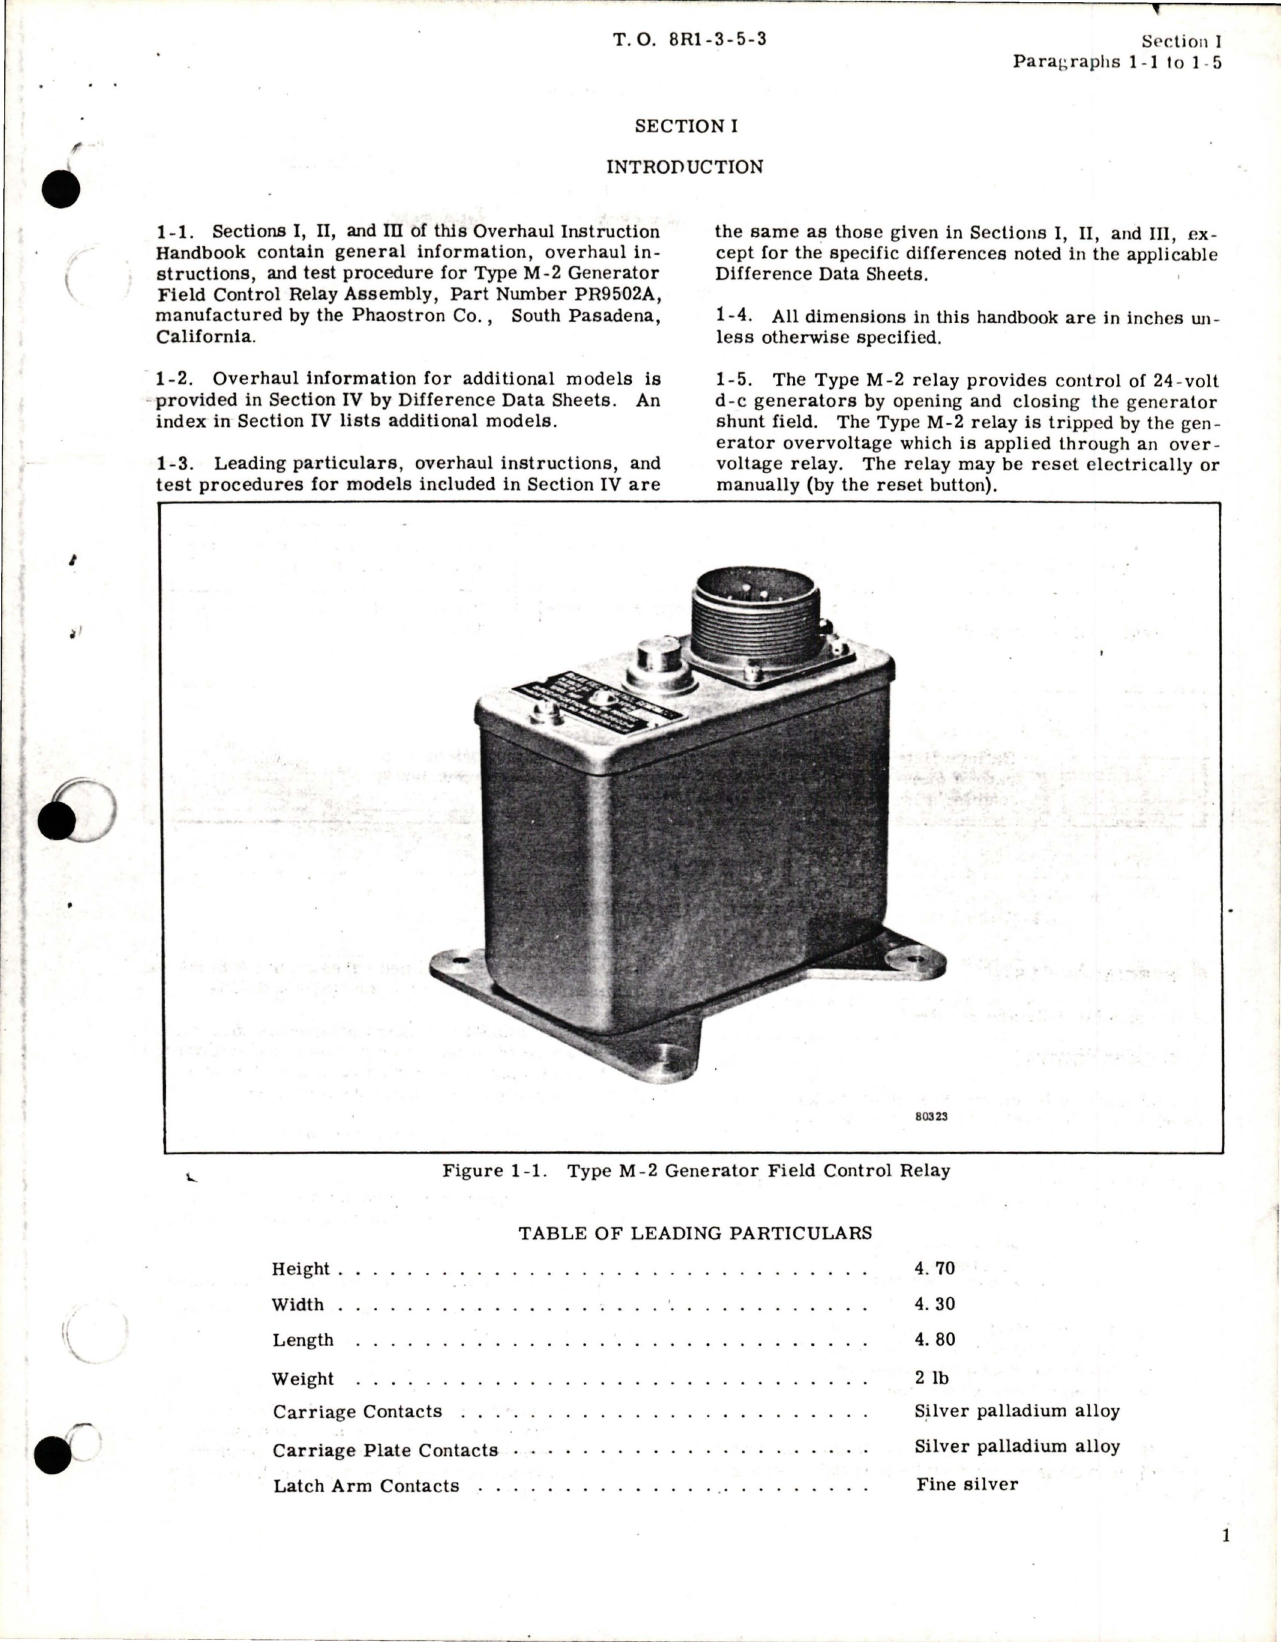 Sample page 7 from AirCorps Library document: Overhaul Instructions for Generator Field Control Relay - Type M-2 - Parts PR9502, PR9502A, and PR9502AC